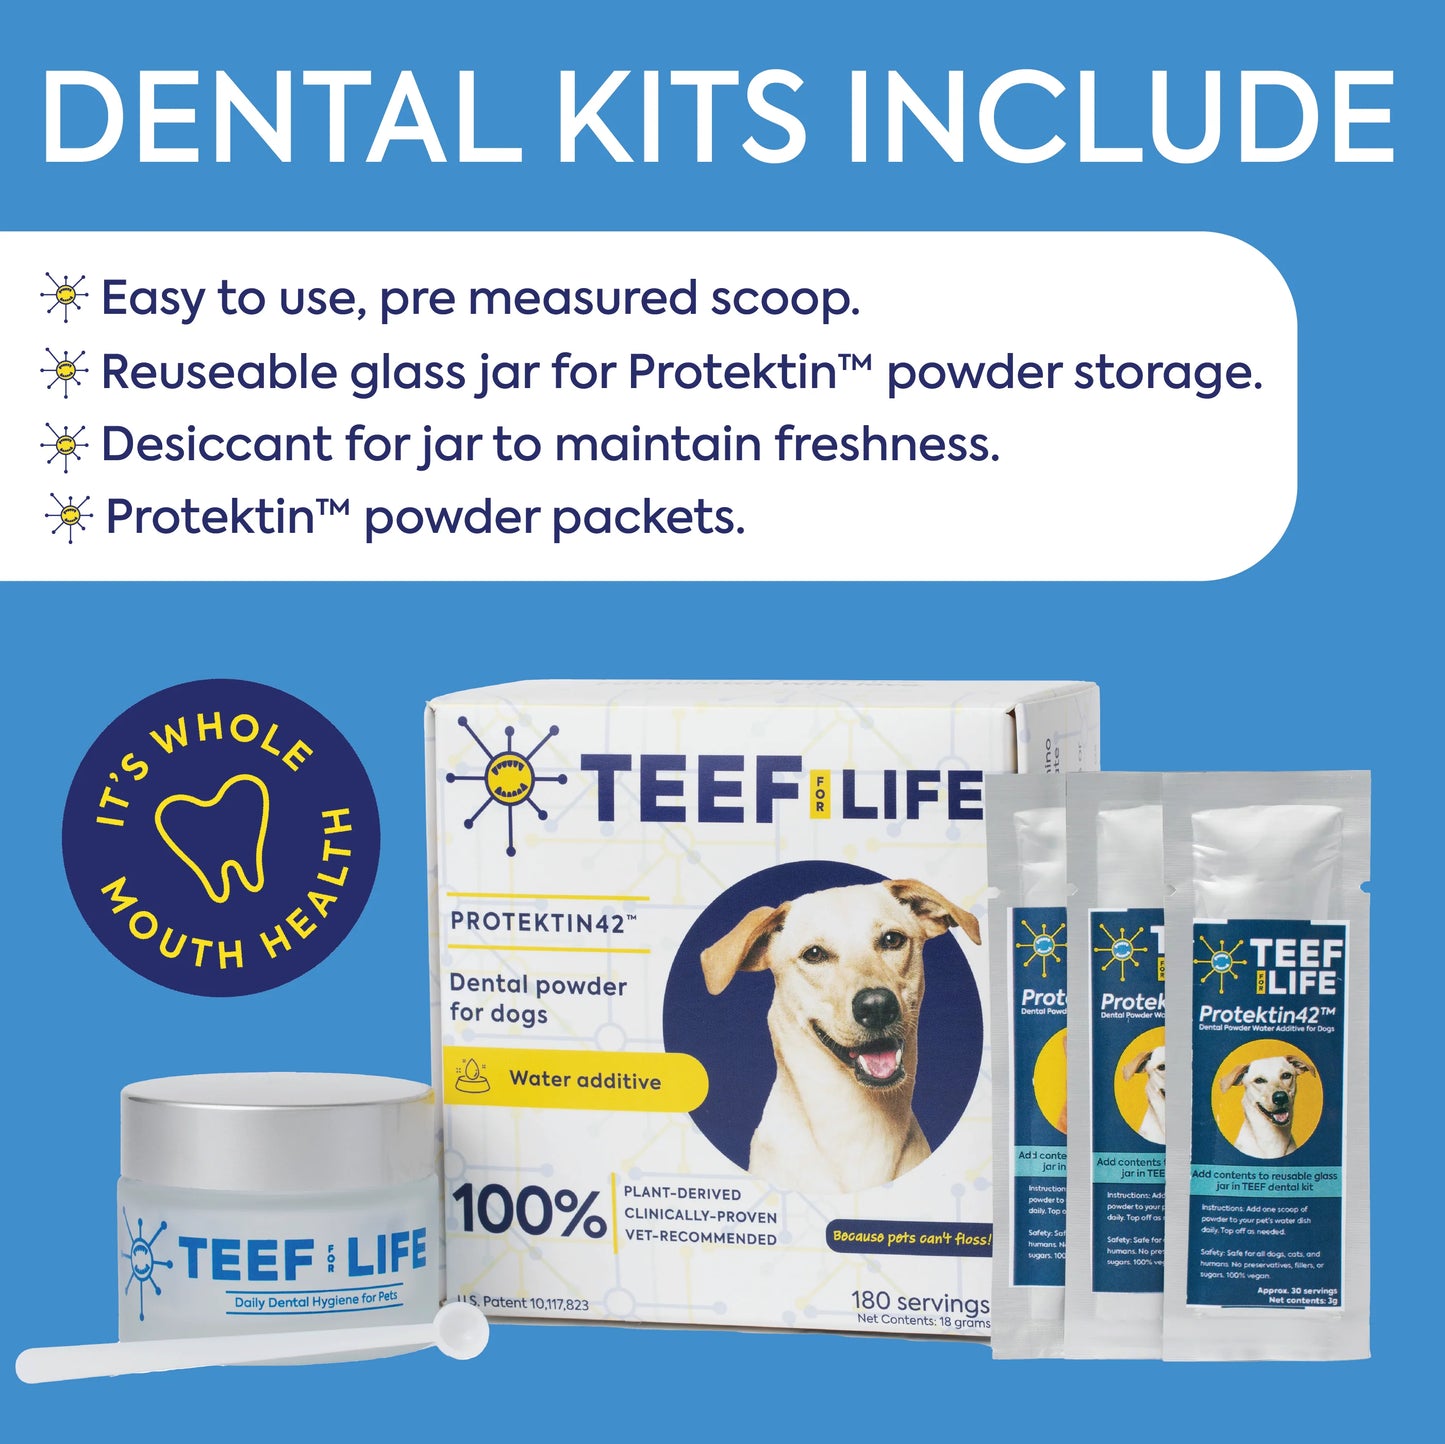 TEEF for Life - Protektin42™ Dental Kit: Powder water additive for dogs (Refillable)